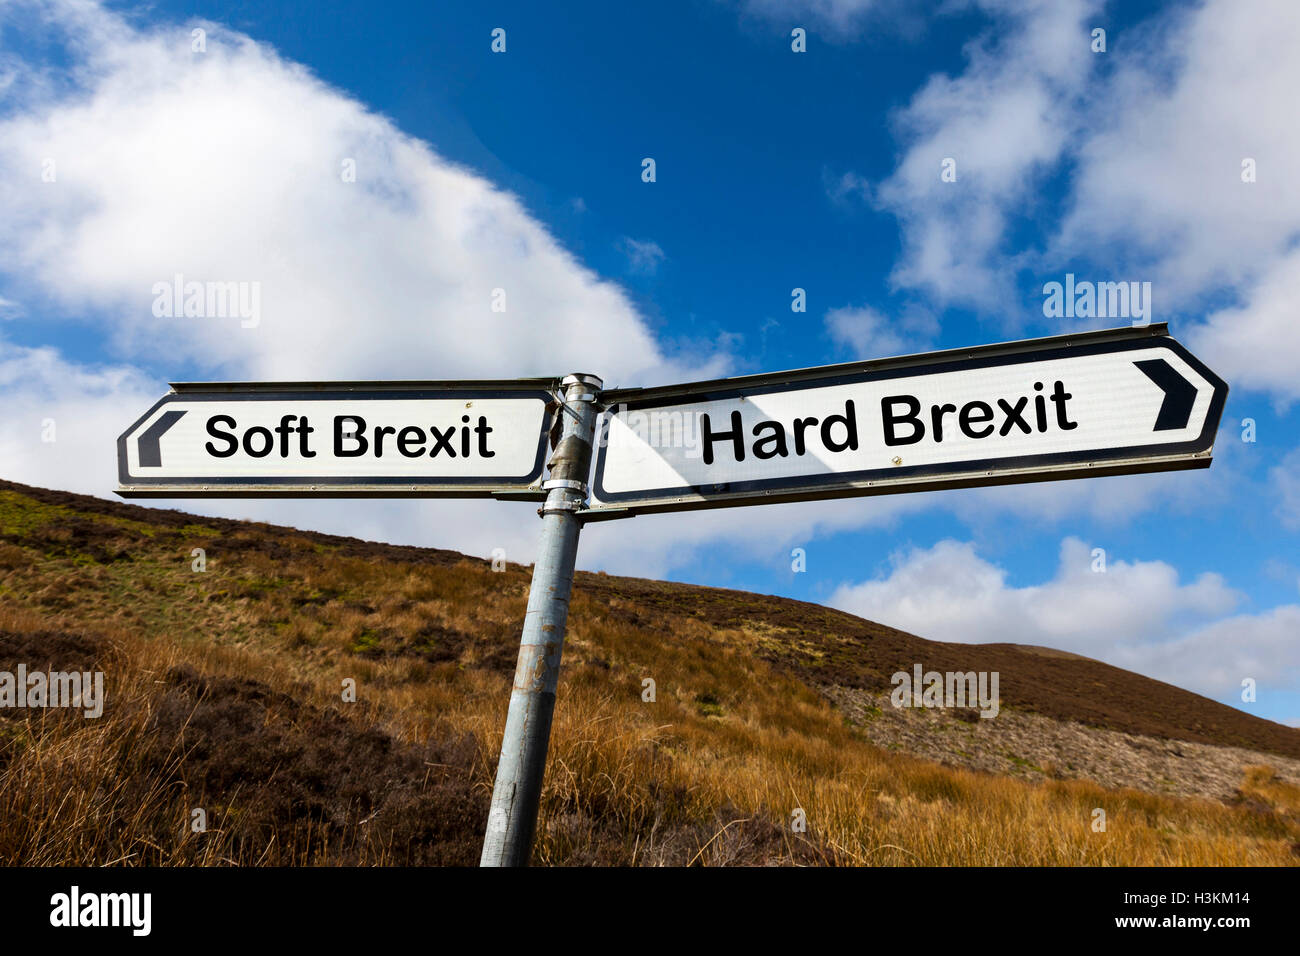 Soft brexit hard brexit GB UK England Article 50 European leaving Europe jurisdiction ruling options choice choices Stock Photo